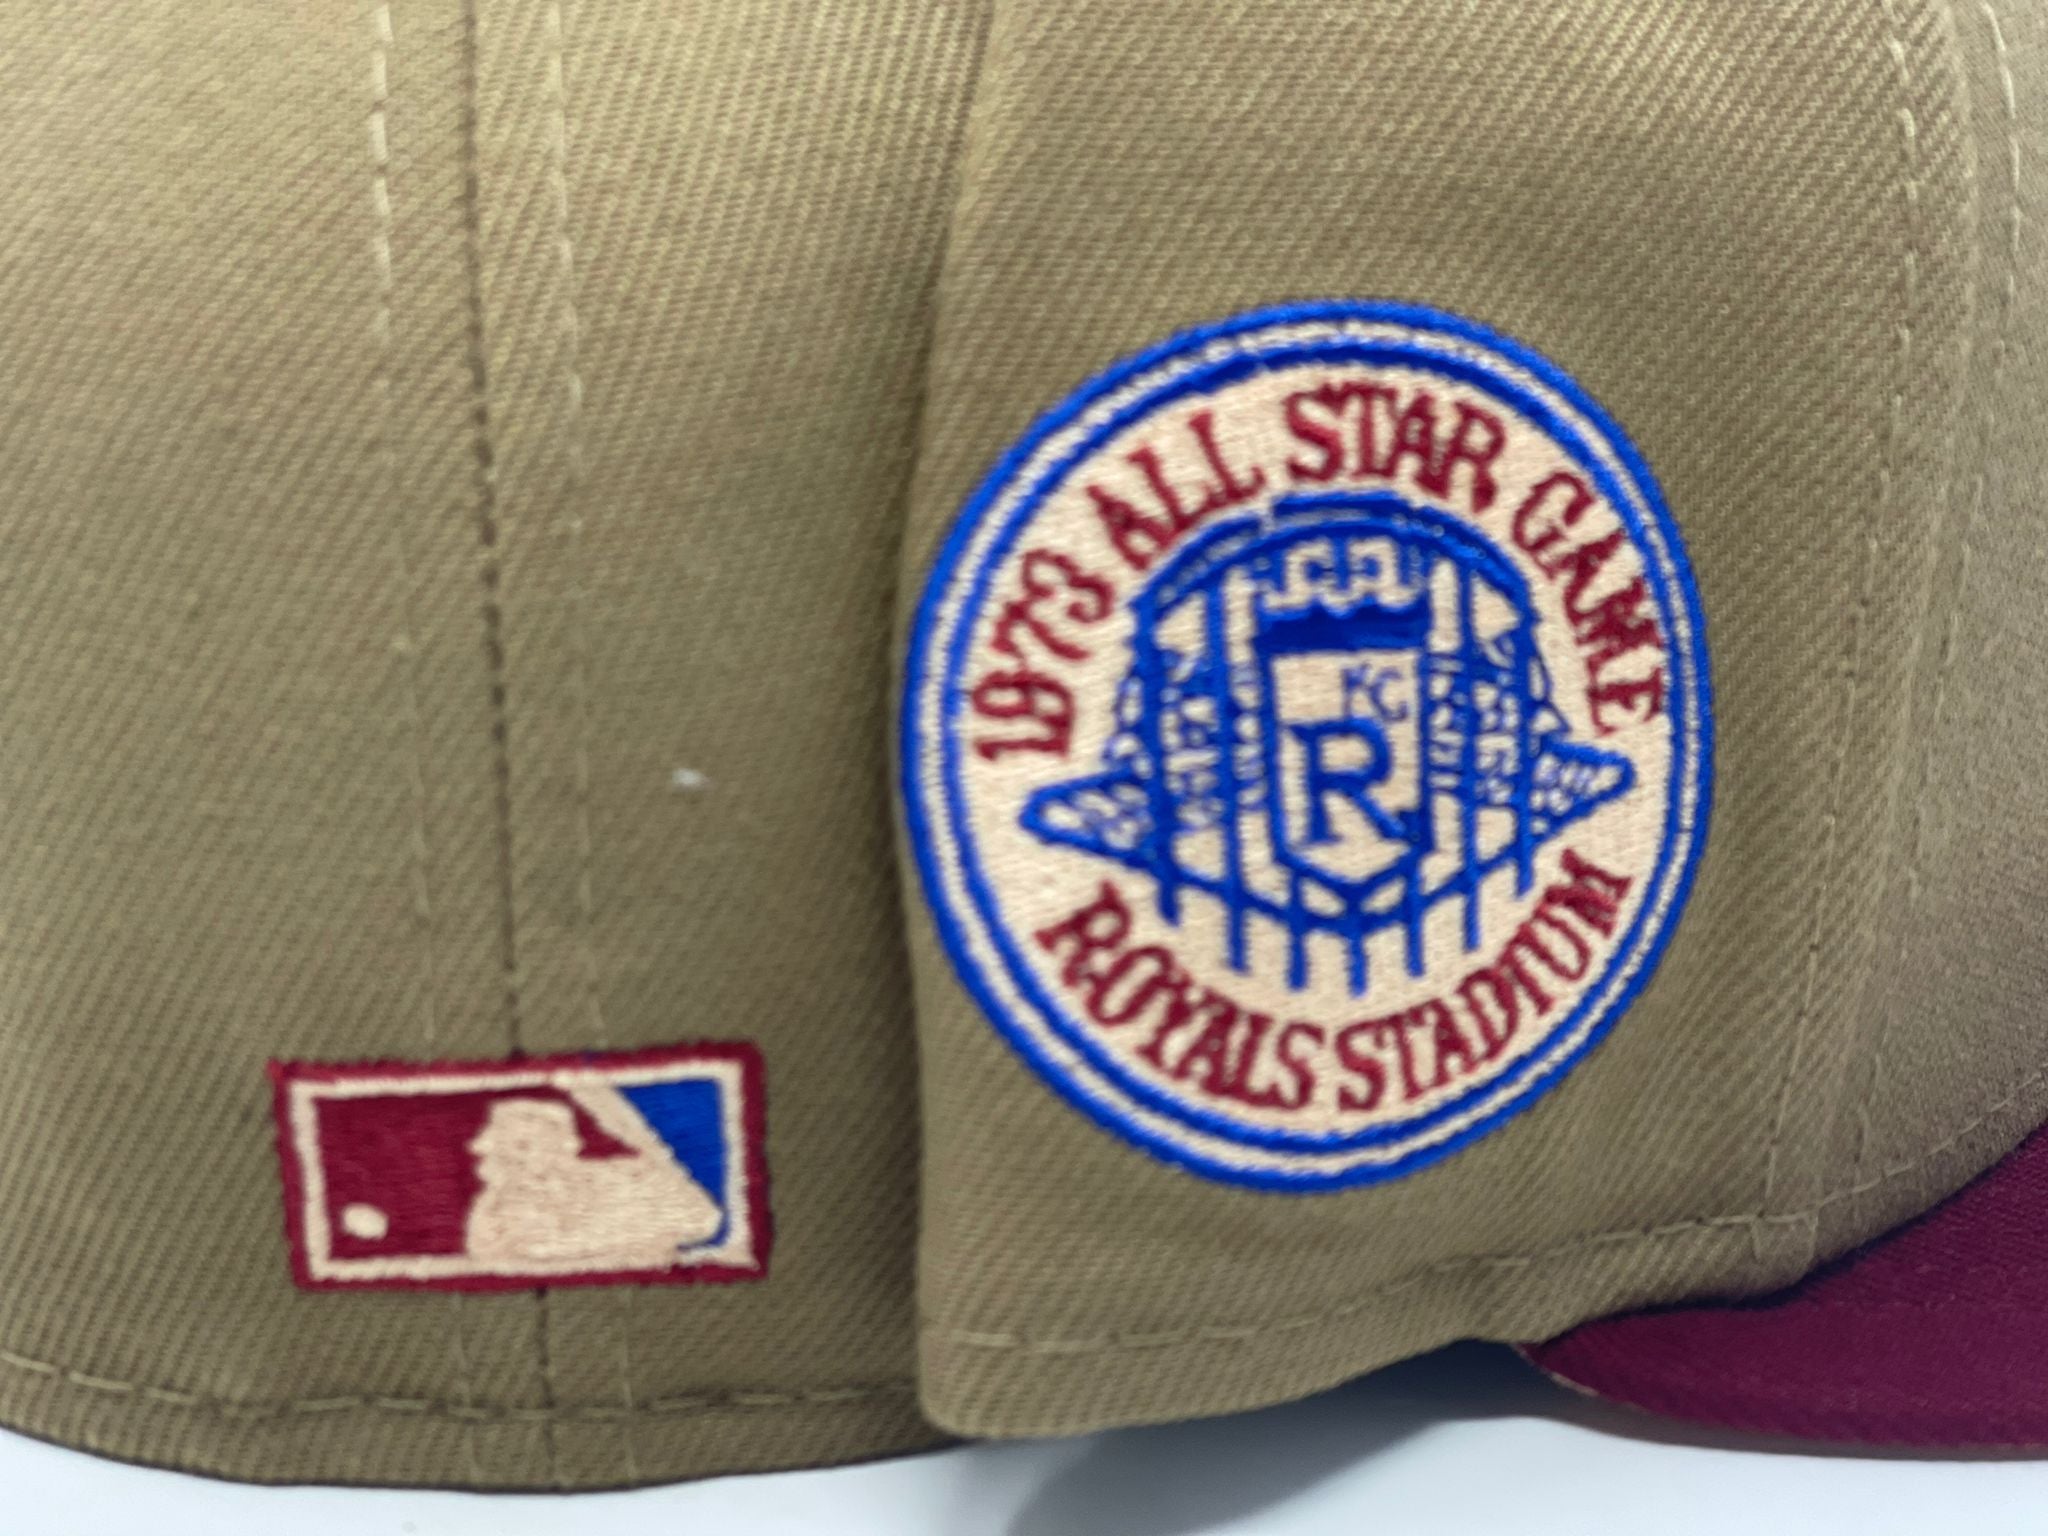 New Era Kansas City Royals 1973 All Star Game Patch 59Fifty Fitted